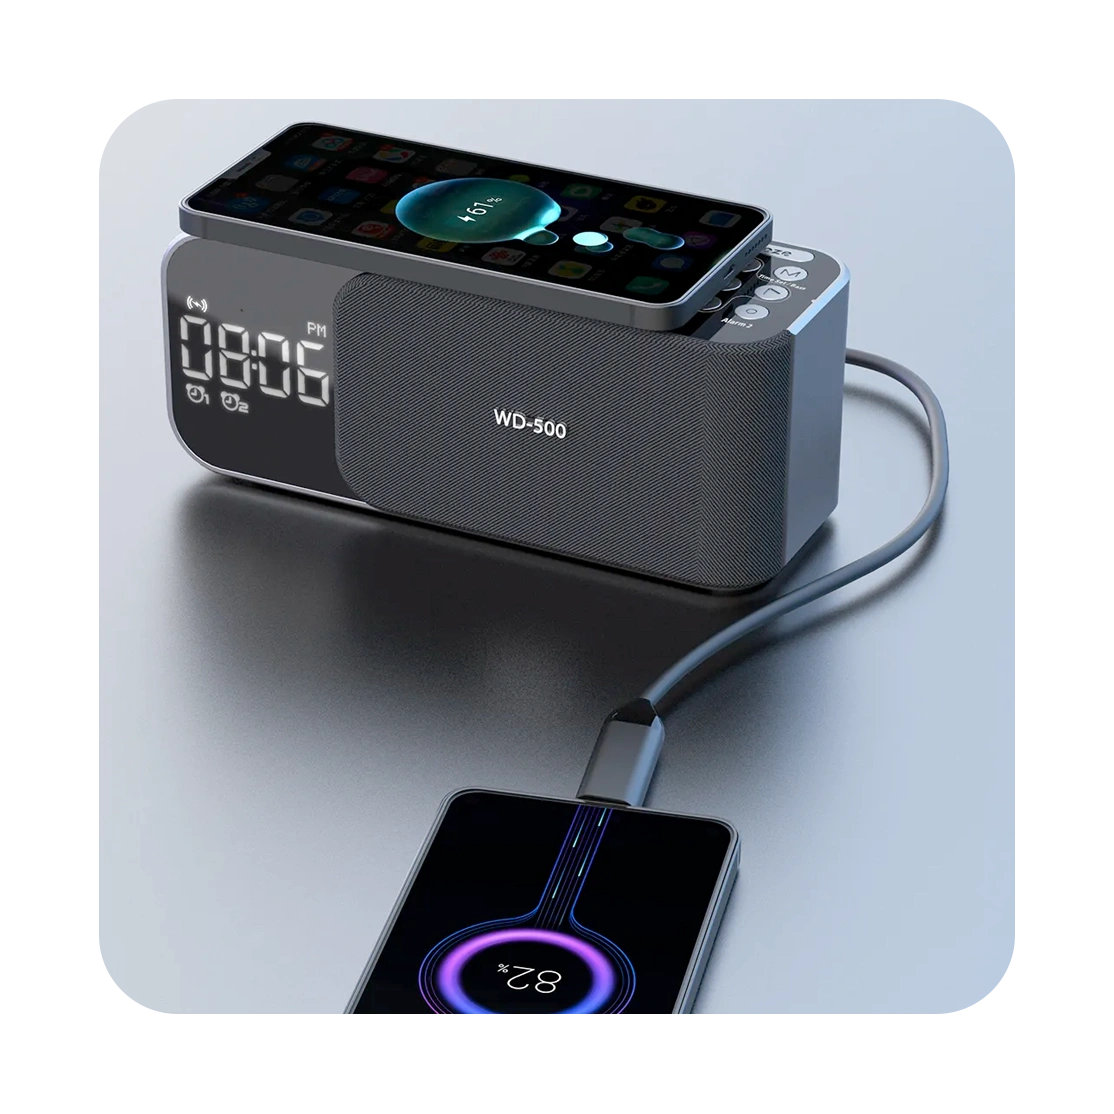 Shaba 4 in 1 Qi Wireless Charger with BT Speakers Time clock WD-500-7